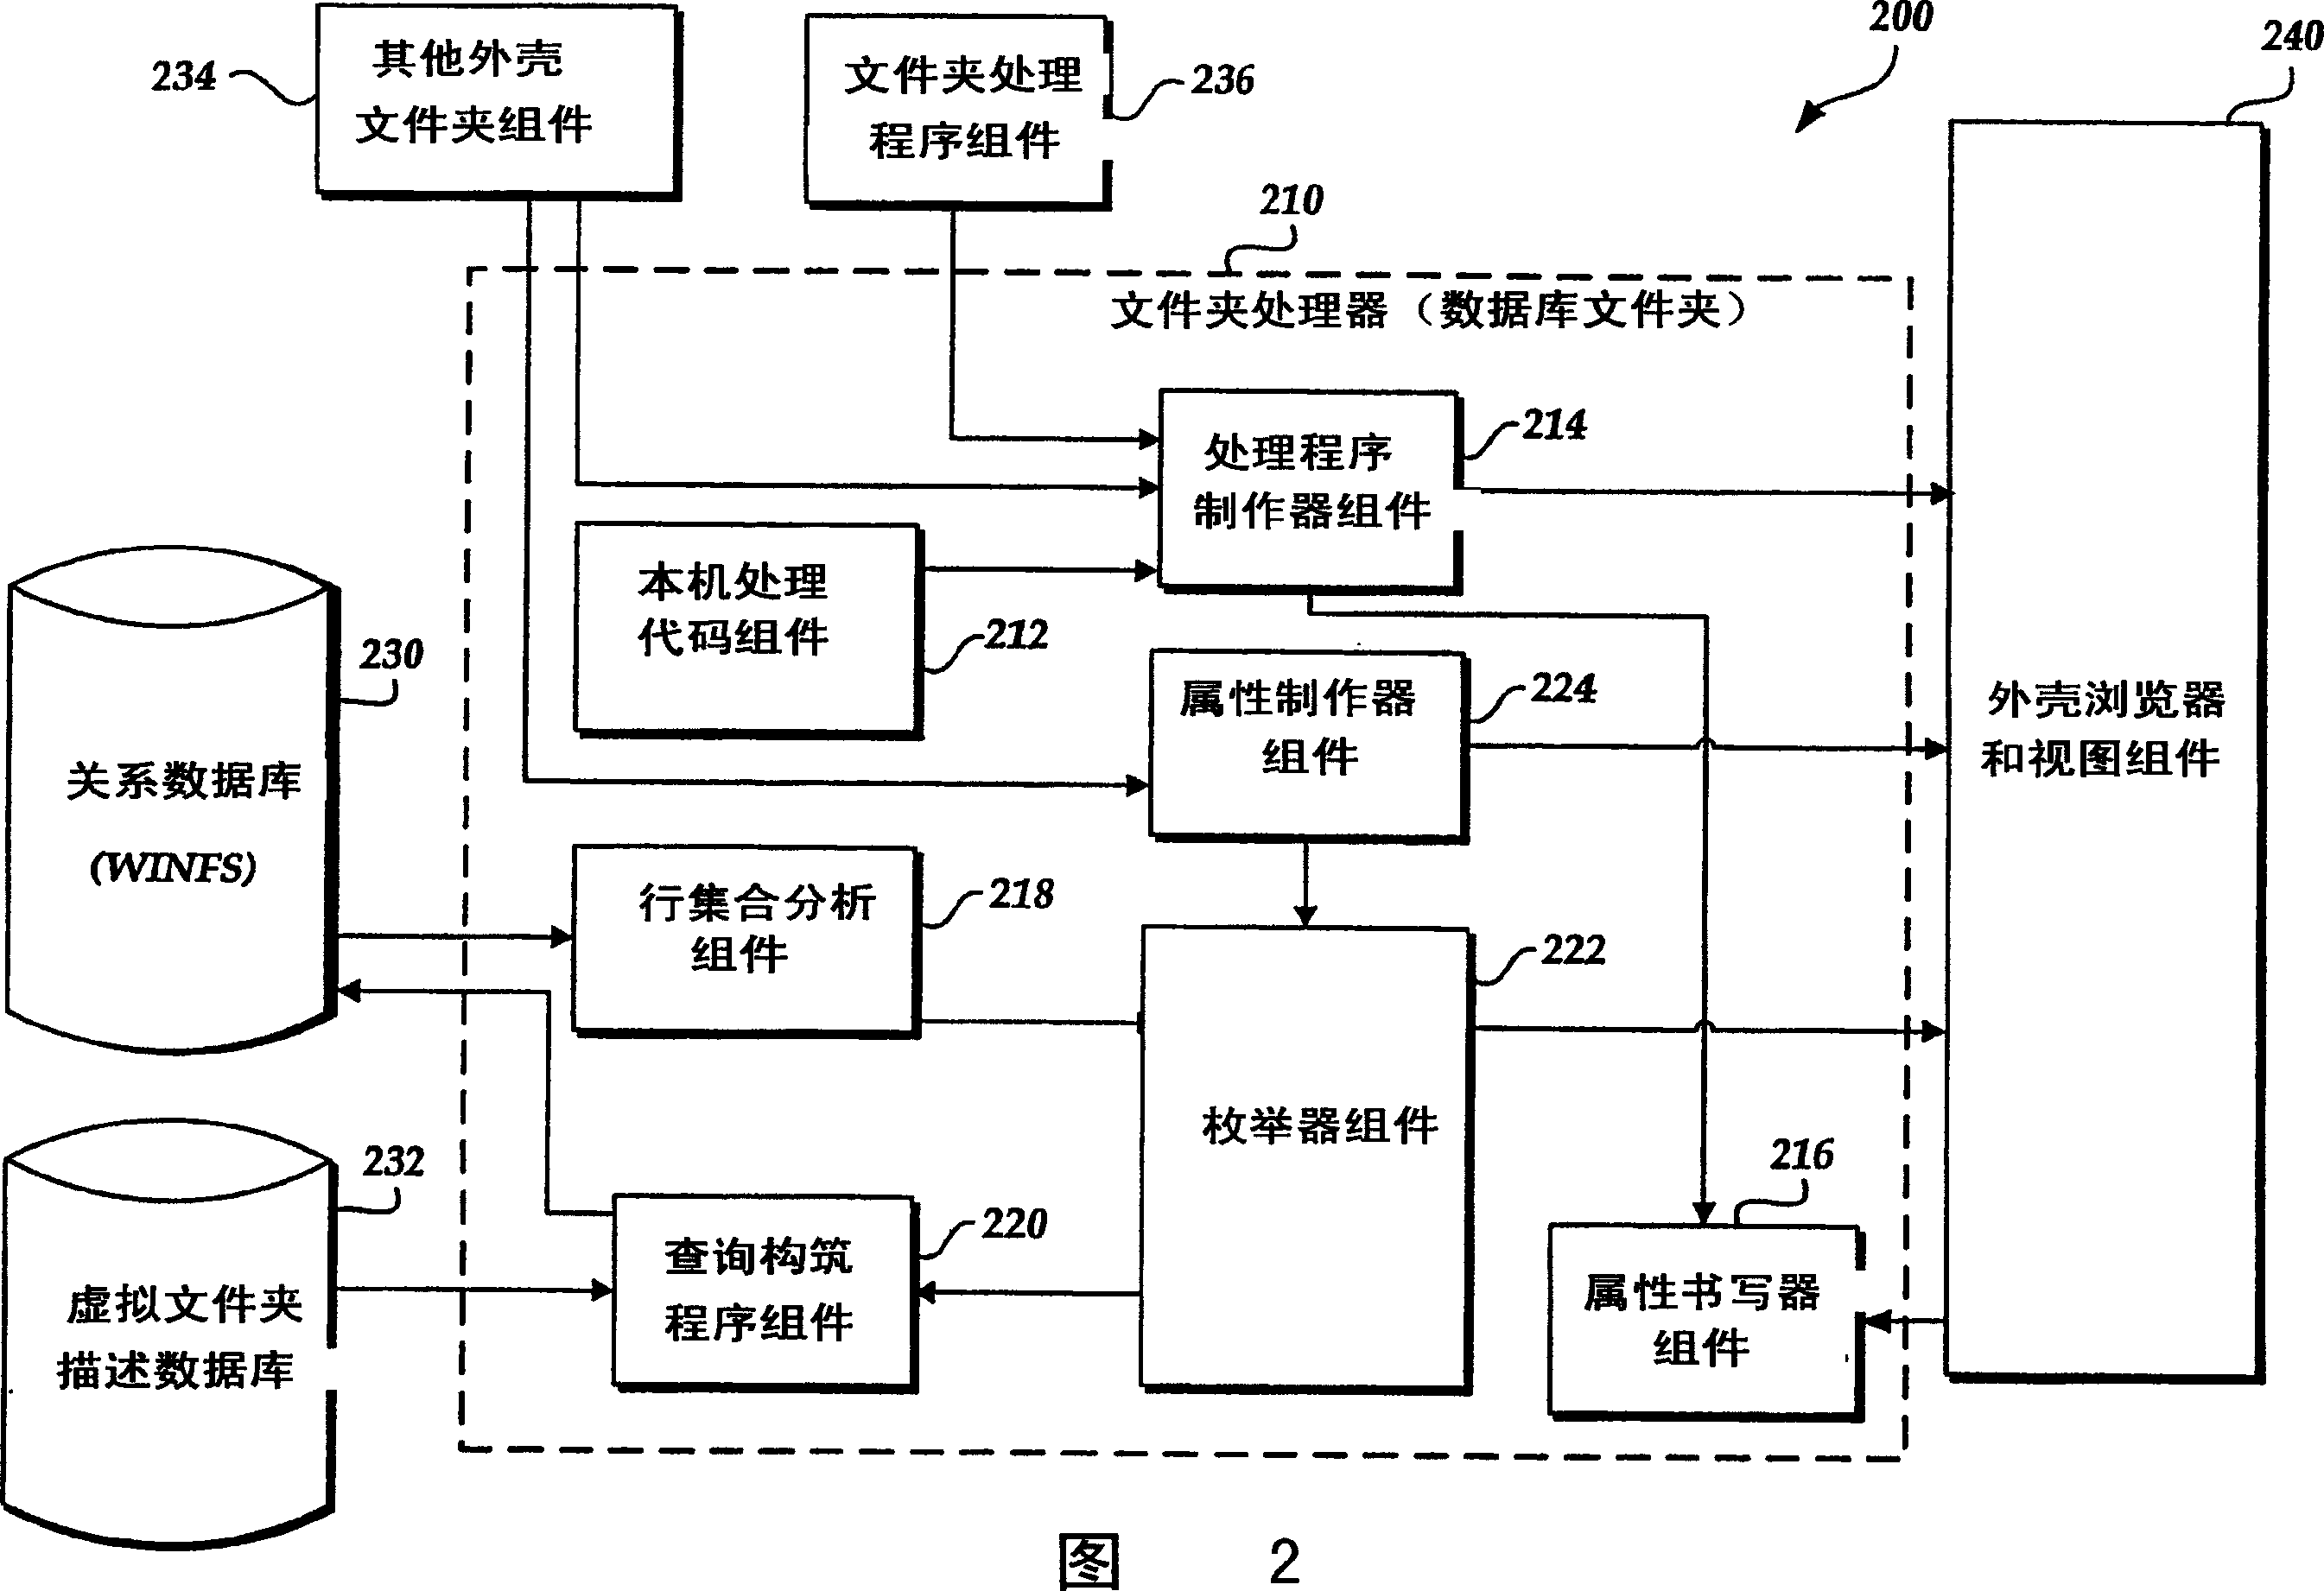 File system housing